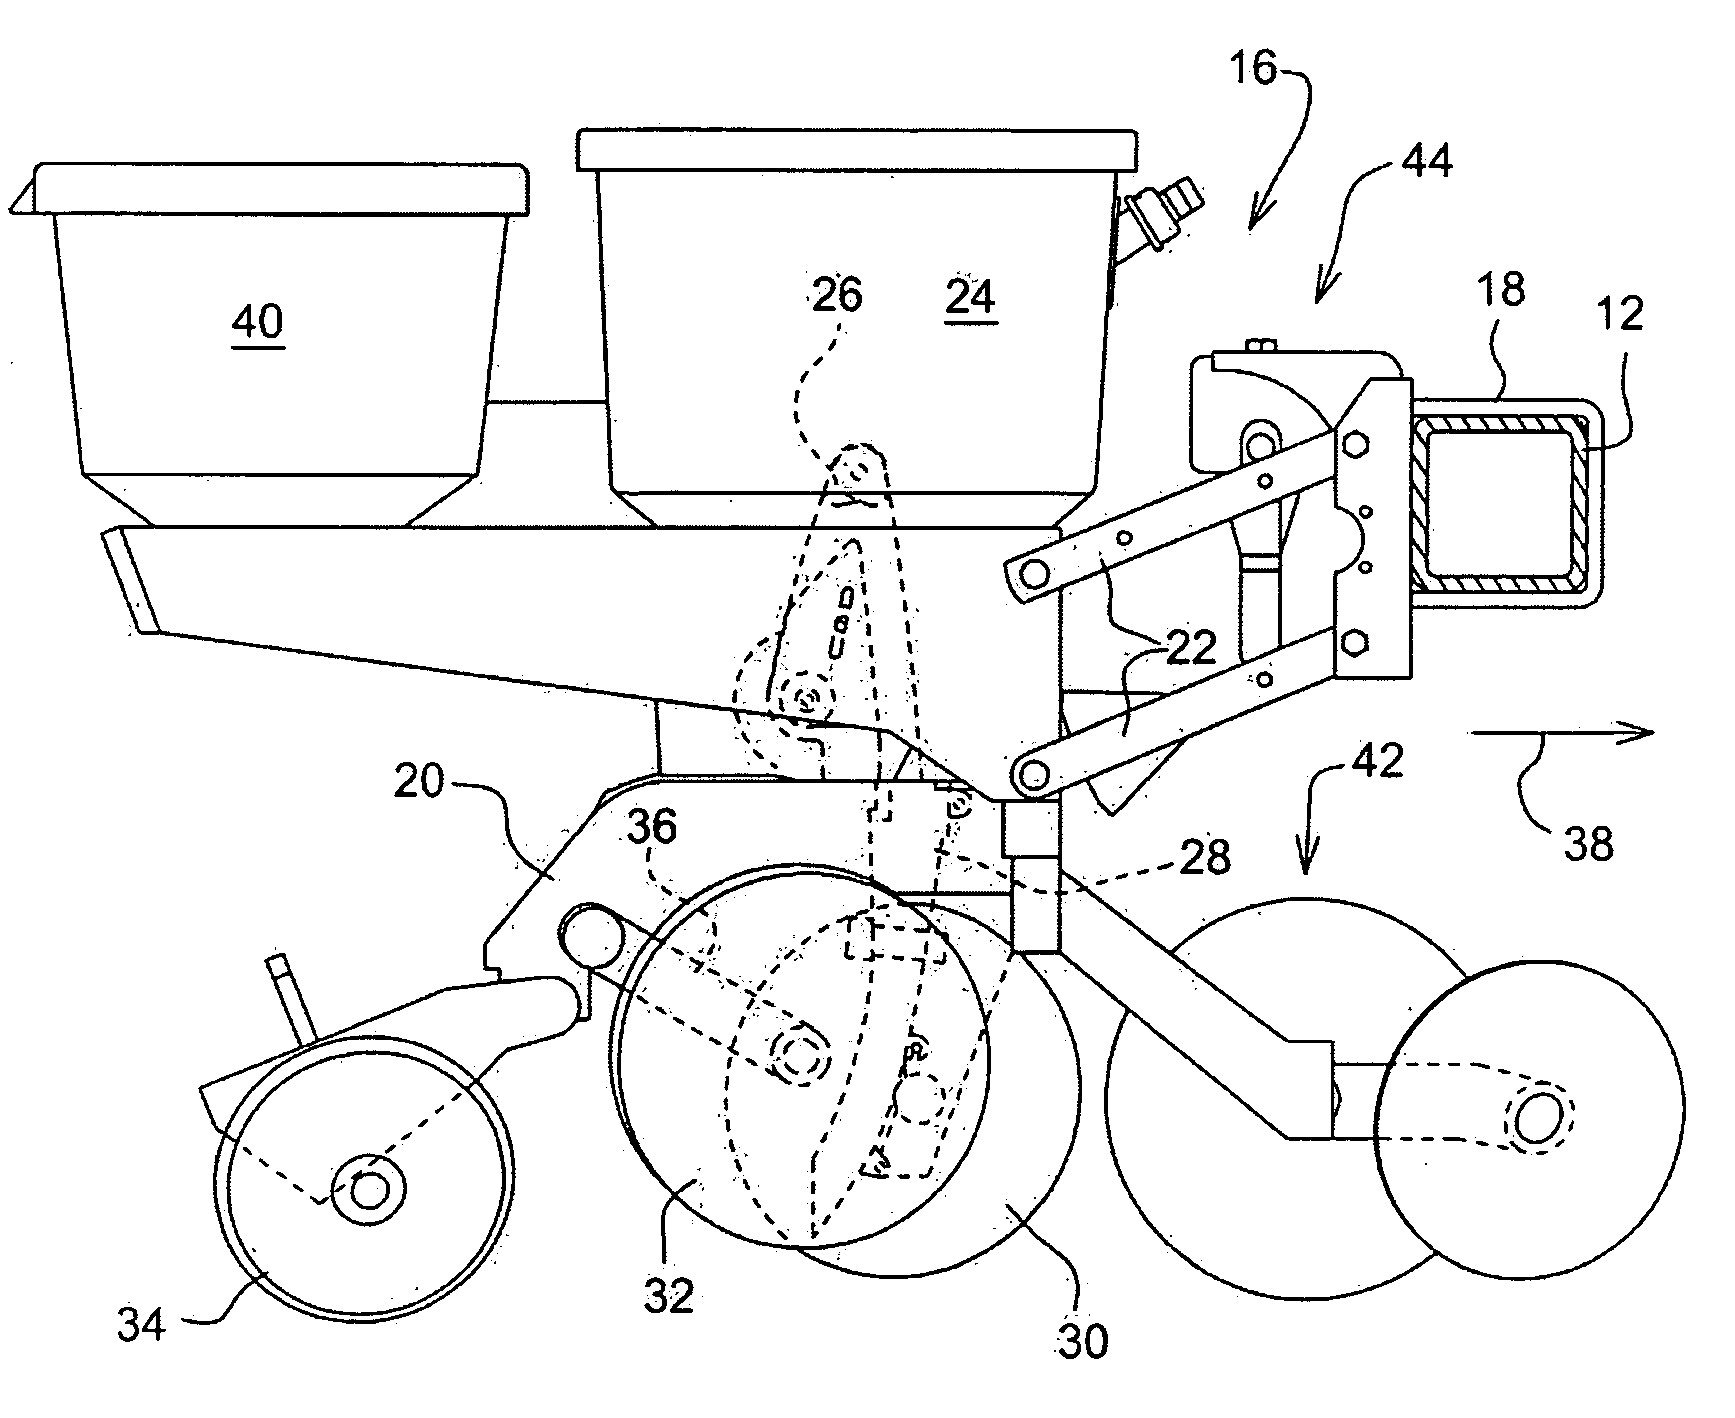 Differential Pressure Seed Meter With An Endless Belt Seed Transport Member